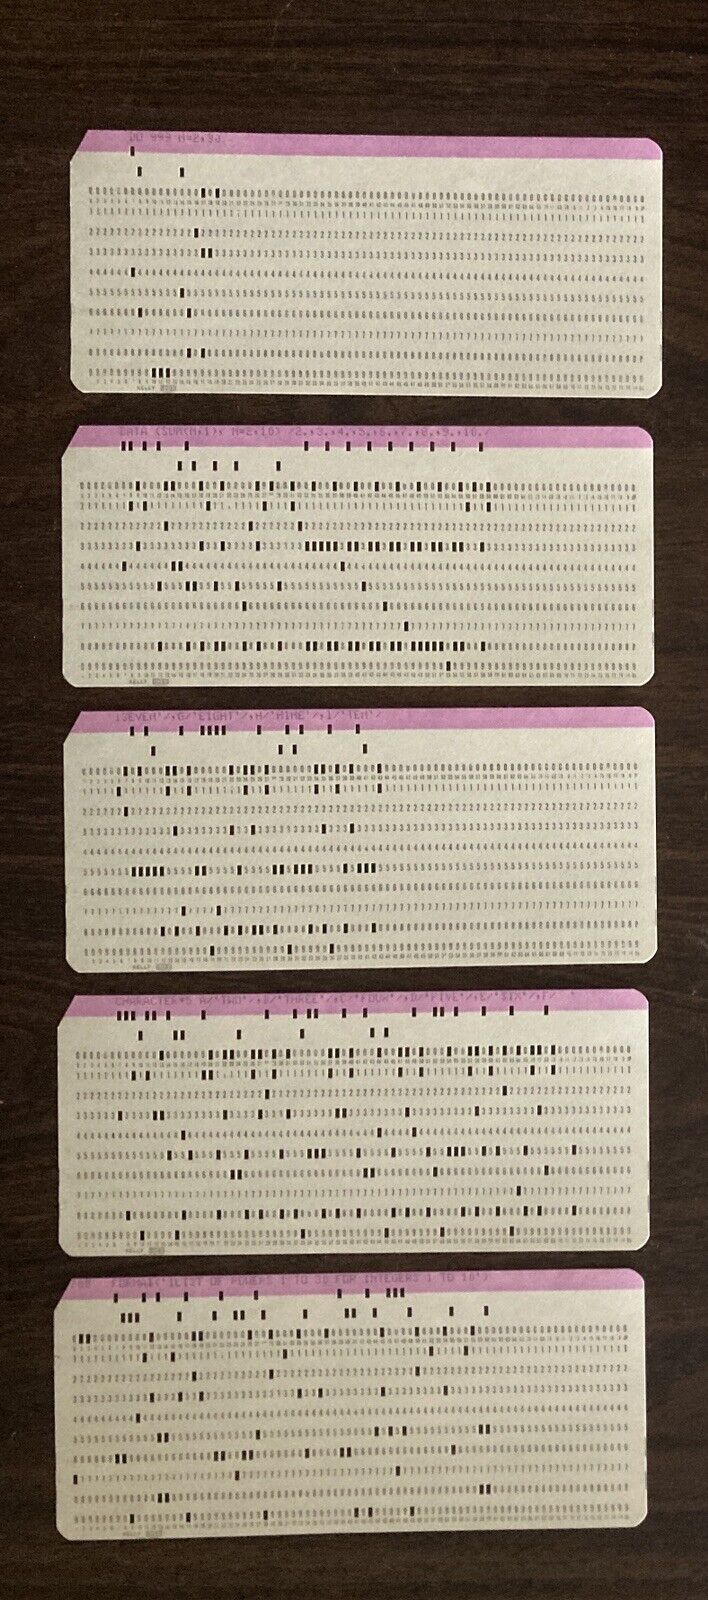 Lot Of 5 - Vintage IBM style 80 Column Punch Cards - Kelly 5081, Pink Print Band